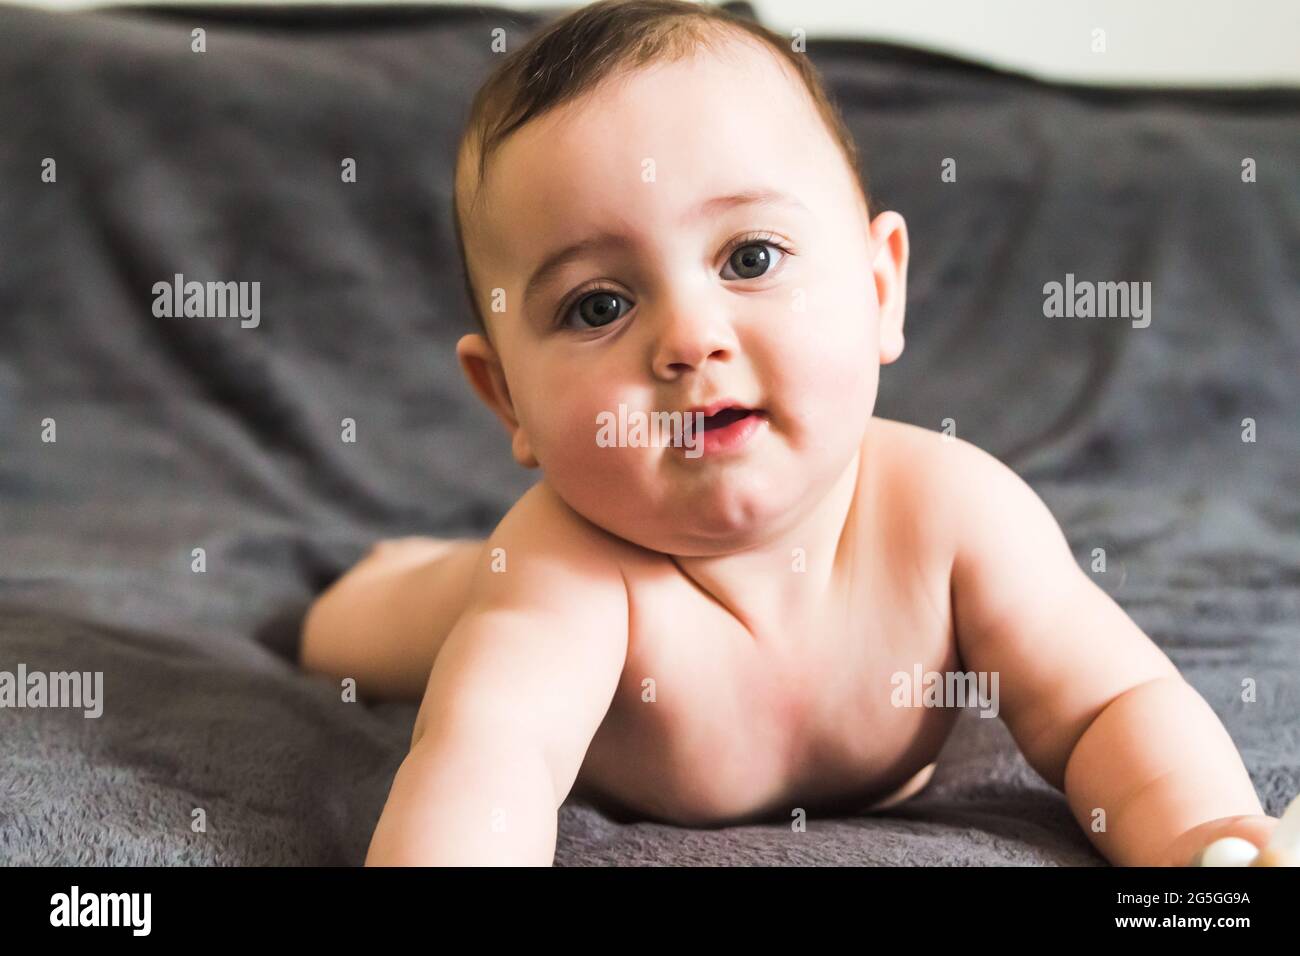 A portrait of adorable baby lying Stock Photo